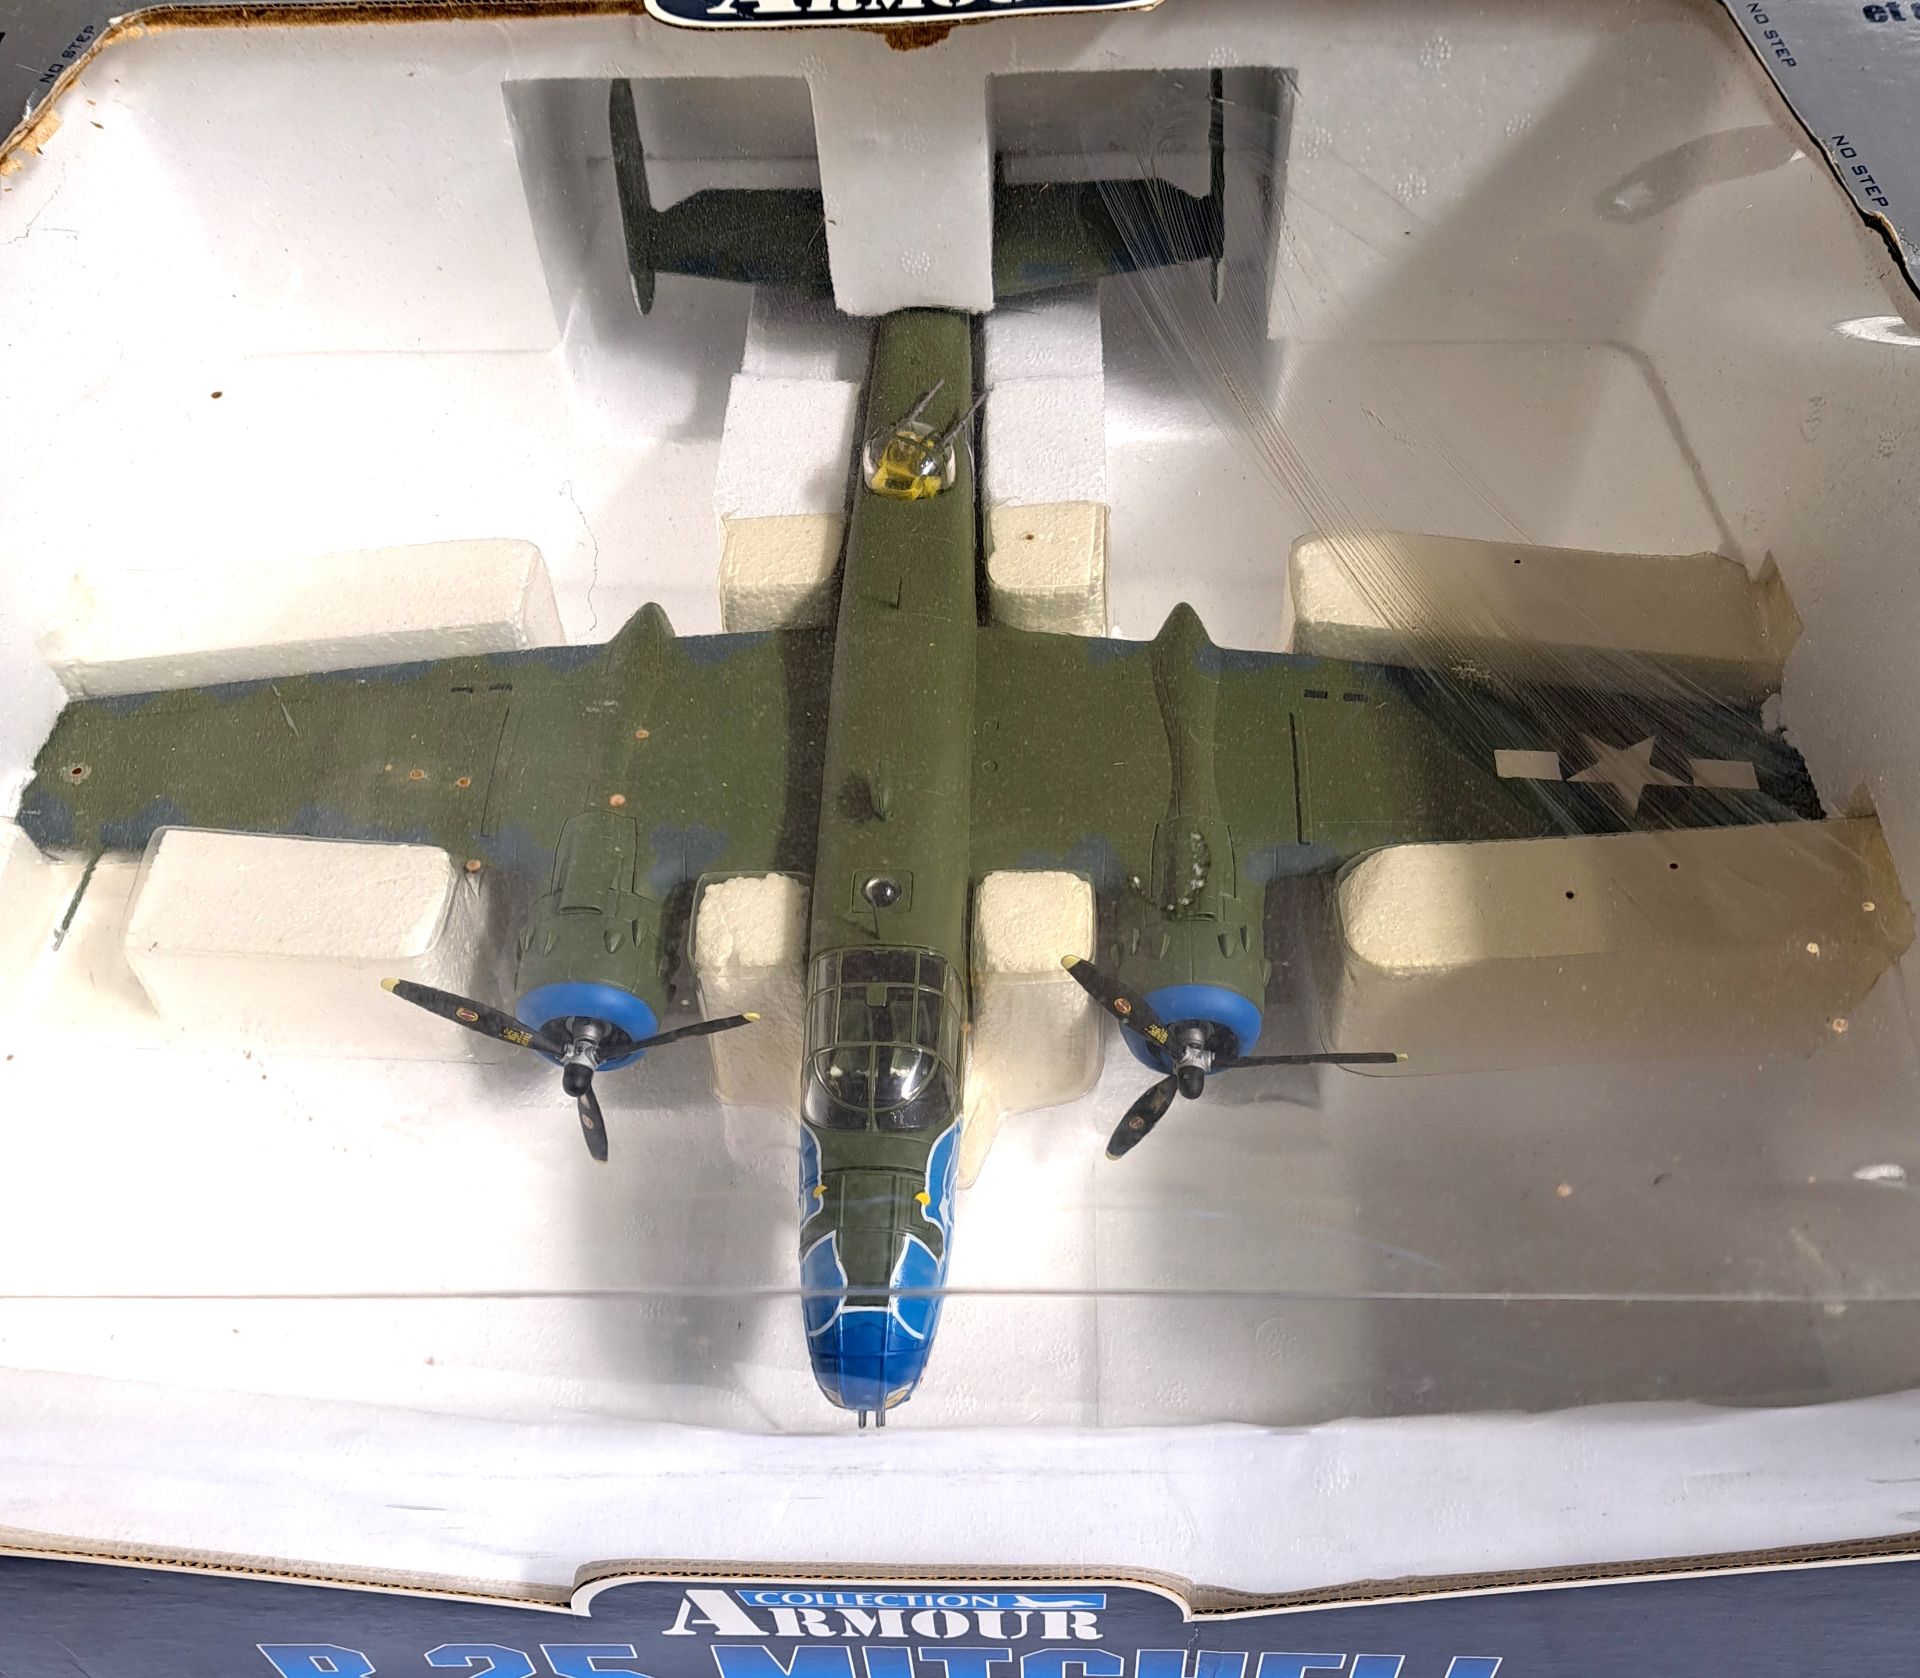 Franklin Mint "Armour Collection", a boxed 1:48 scale military aircraft B11B569 - Image 2 of 2